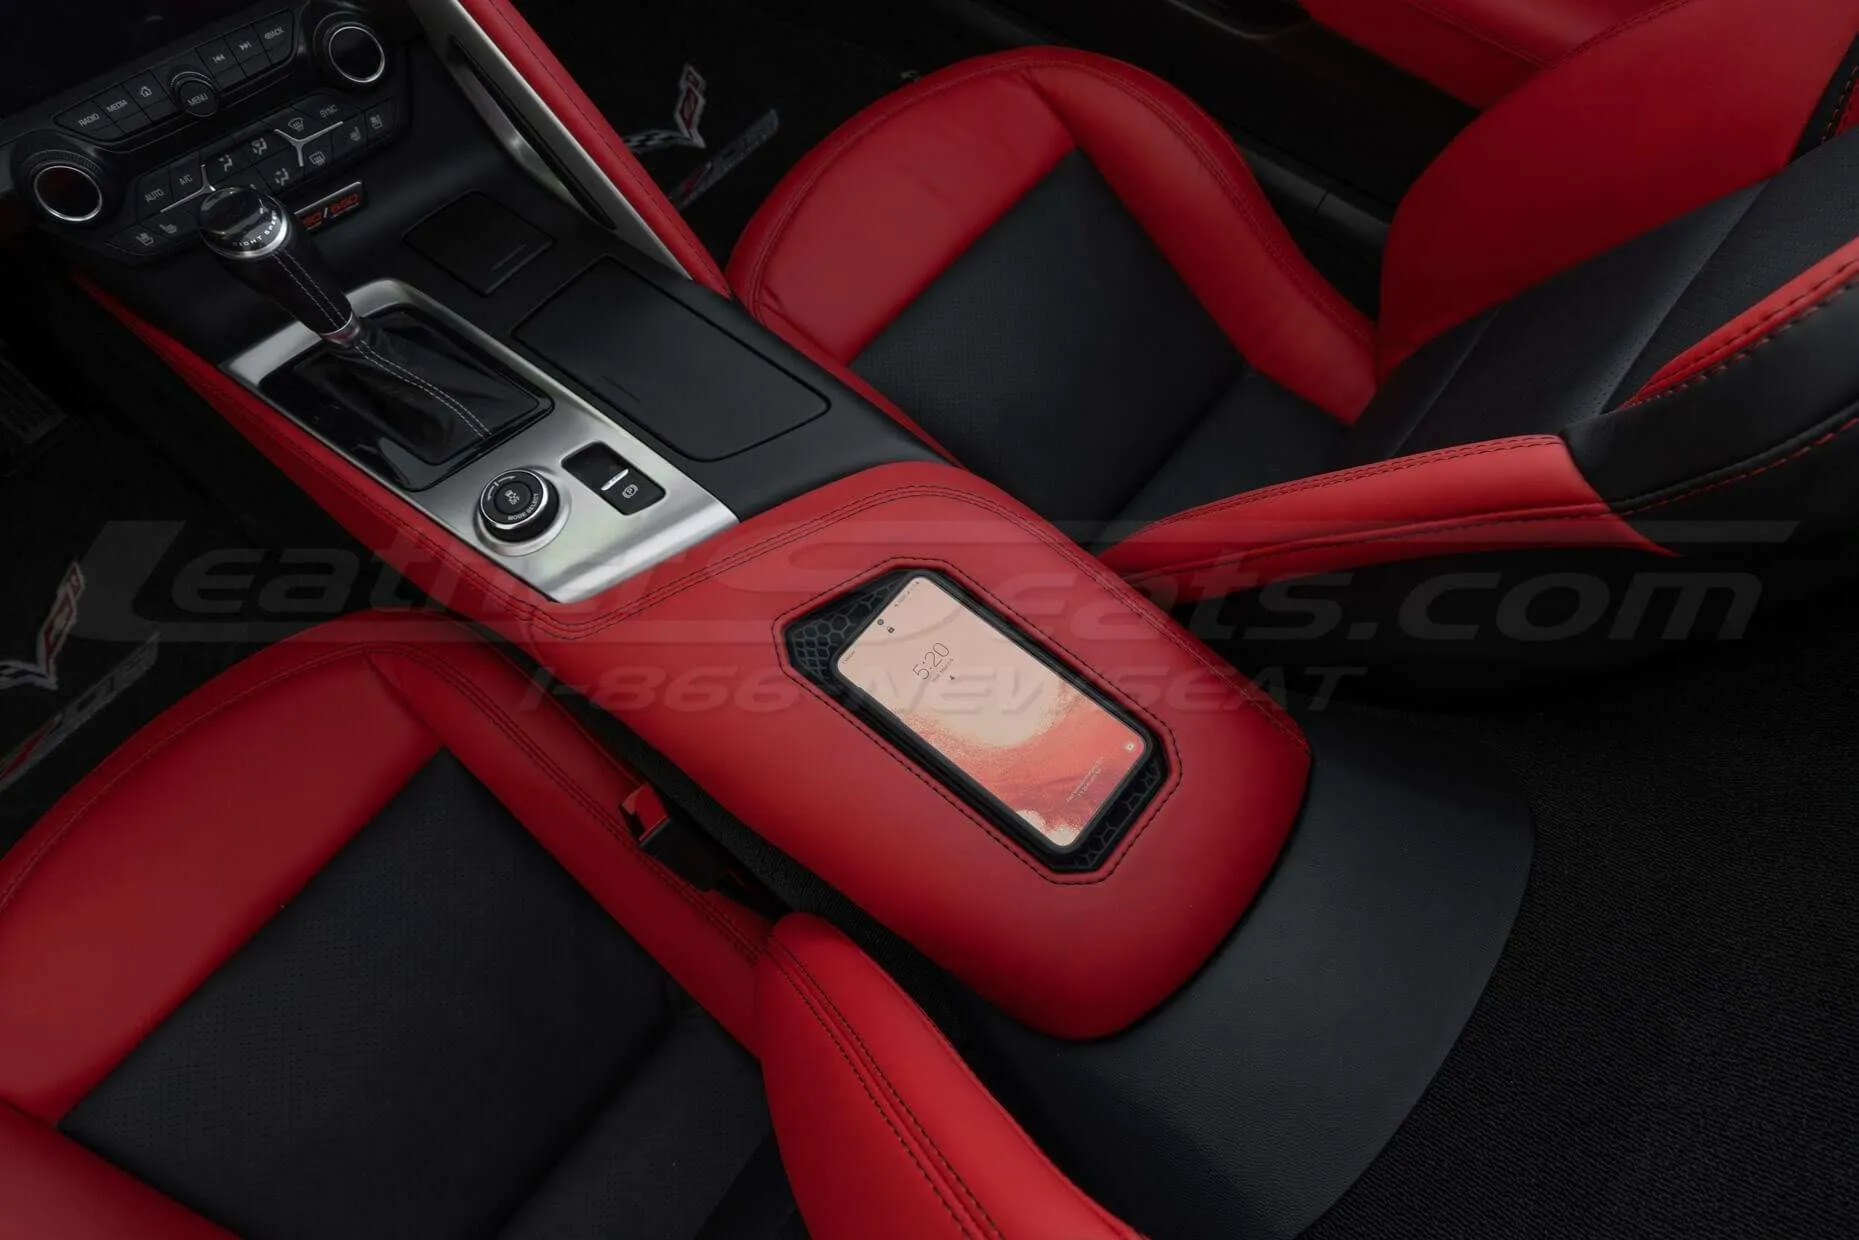 Chevy Corvette Sanctum Charging Console - Samsung Galaxy S22+ charging example